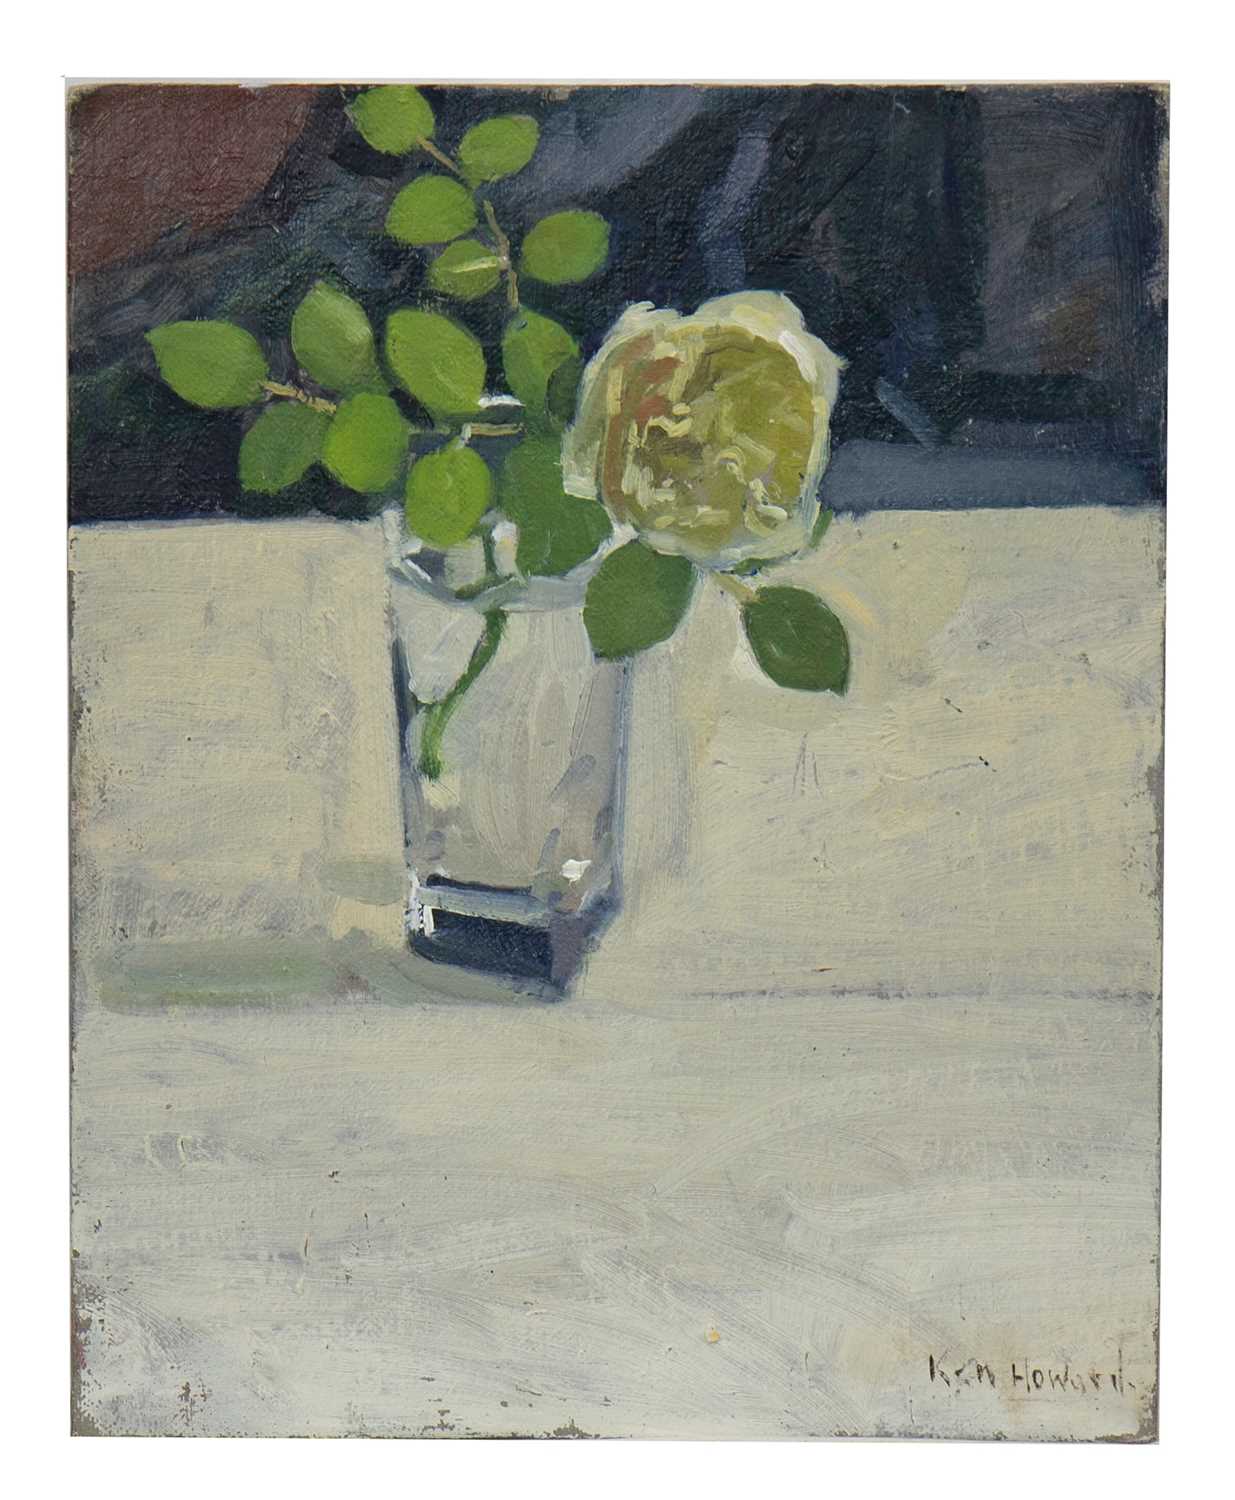 Lot 668 - STILL LIFE OF A ROSE IN A GLASS, AN OIL BY KEN HOWARD